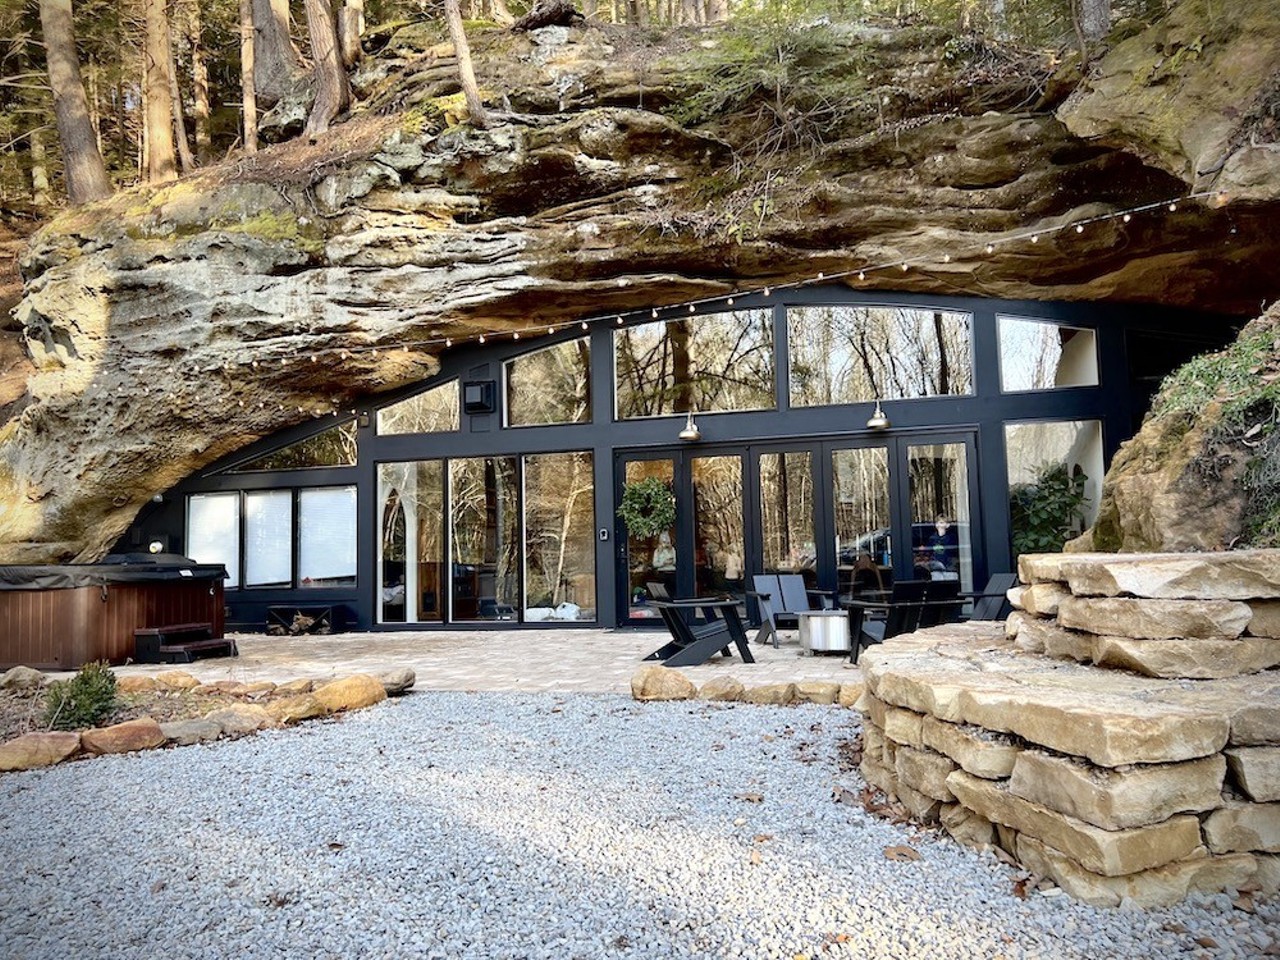 You Can Stay in a Cave House During Your Next Visit to Hocking Hills